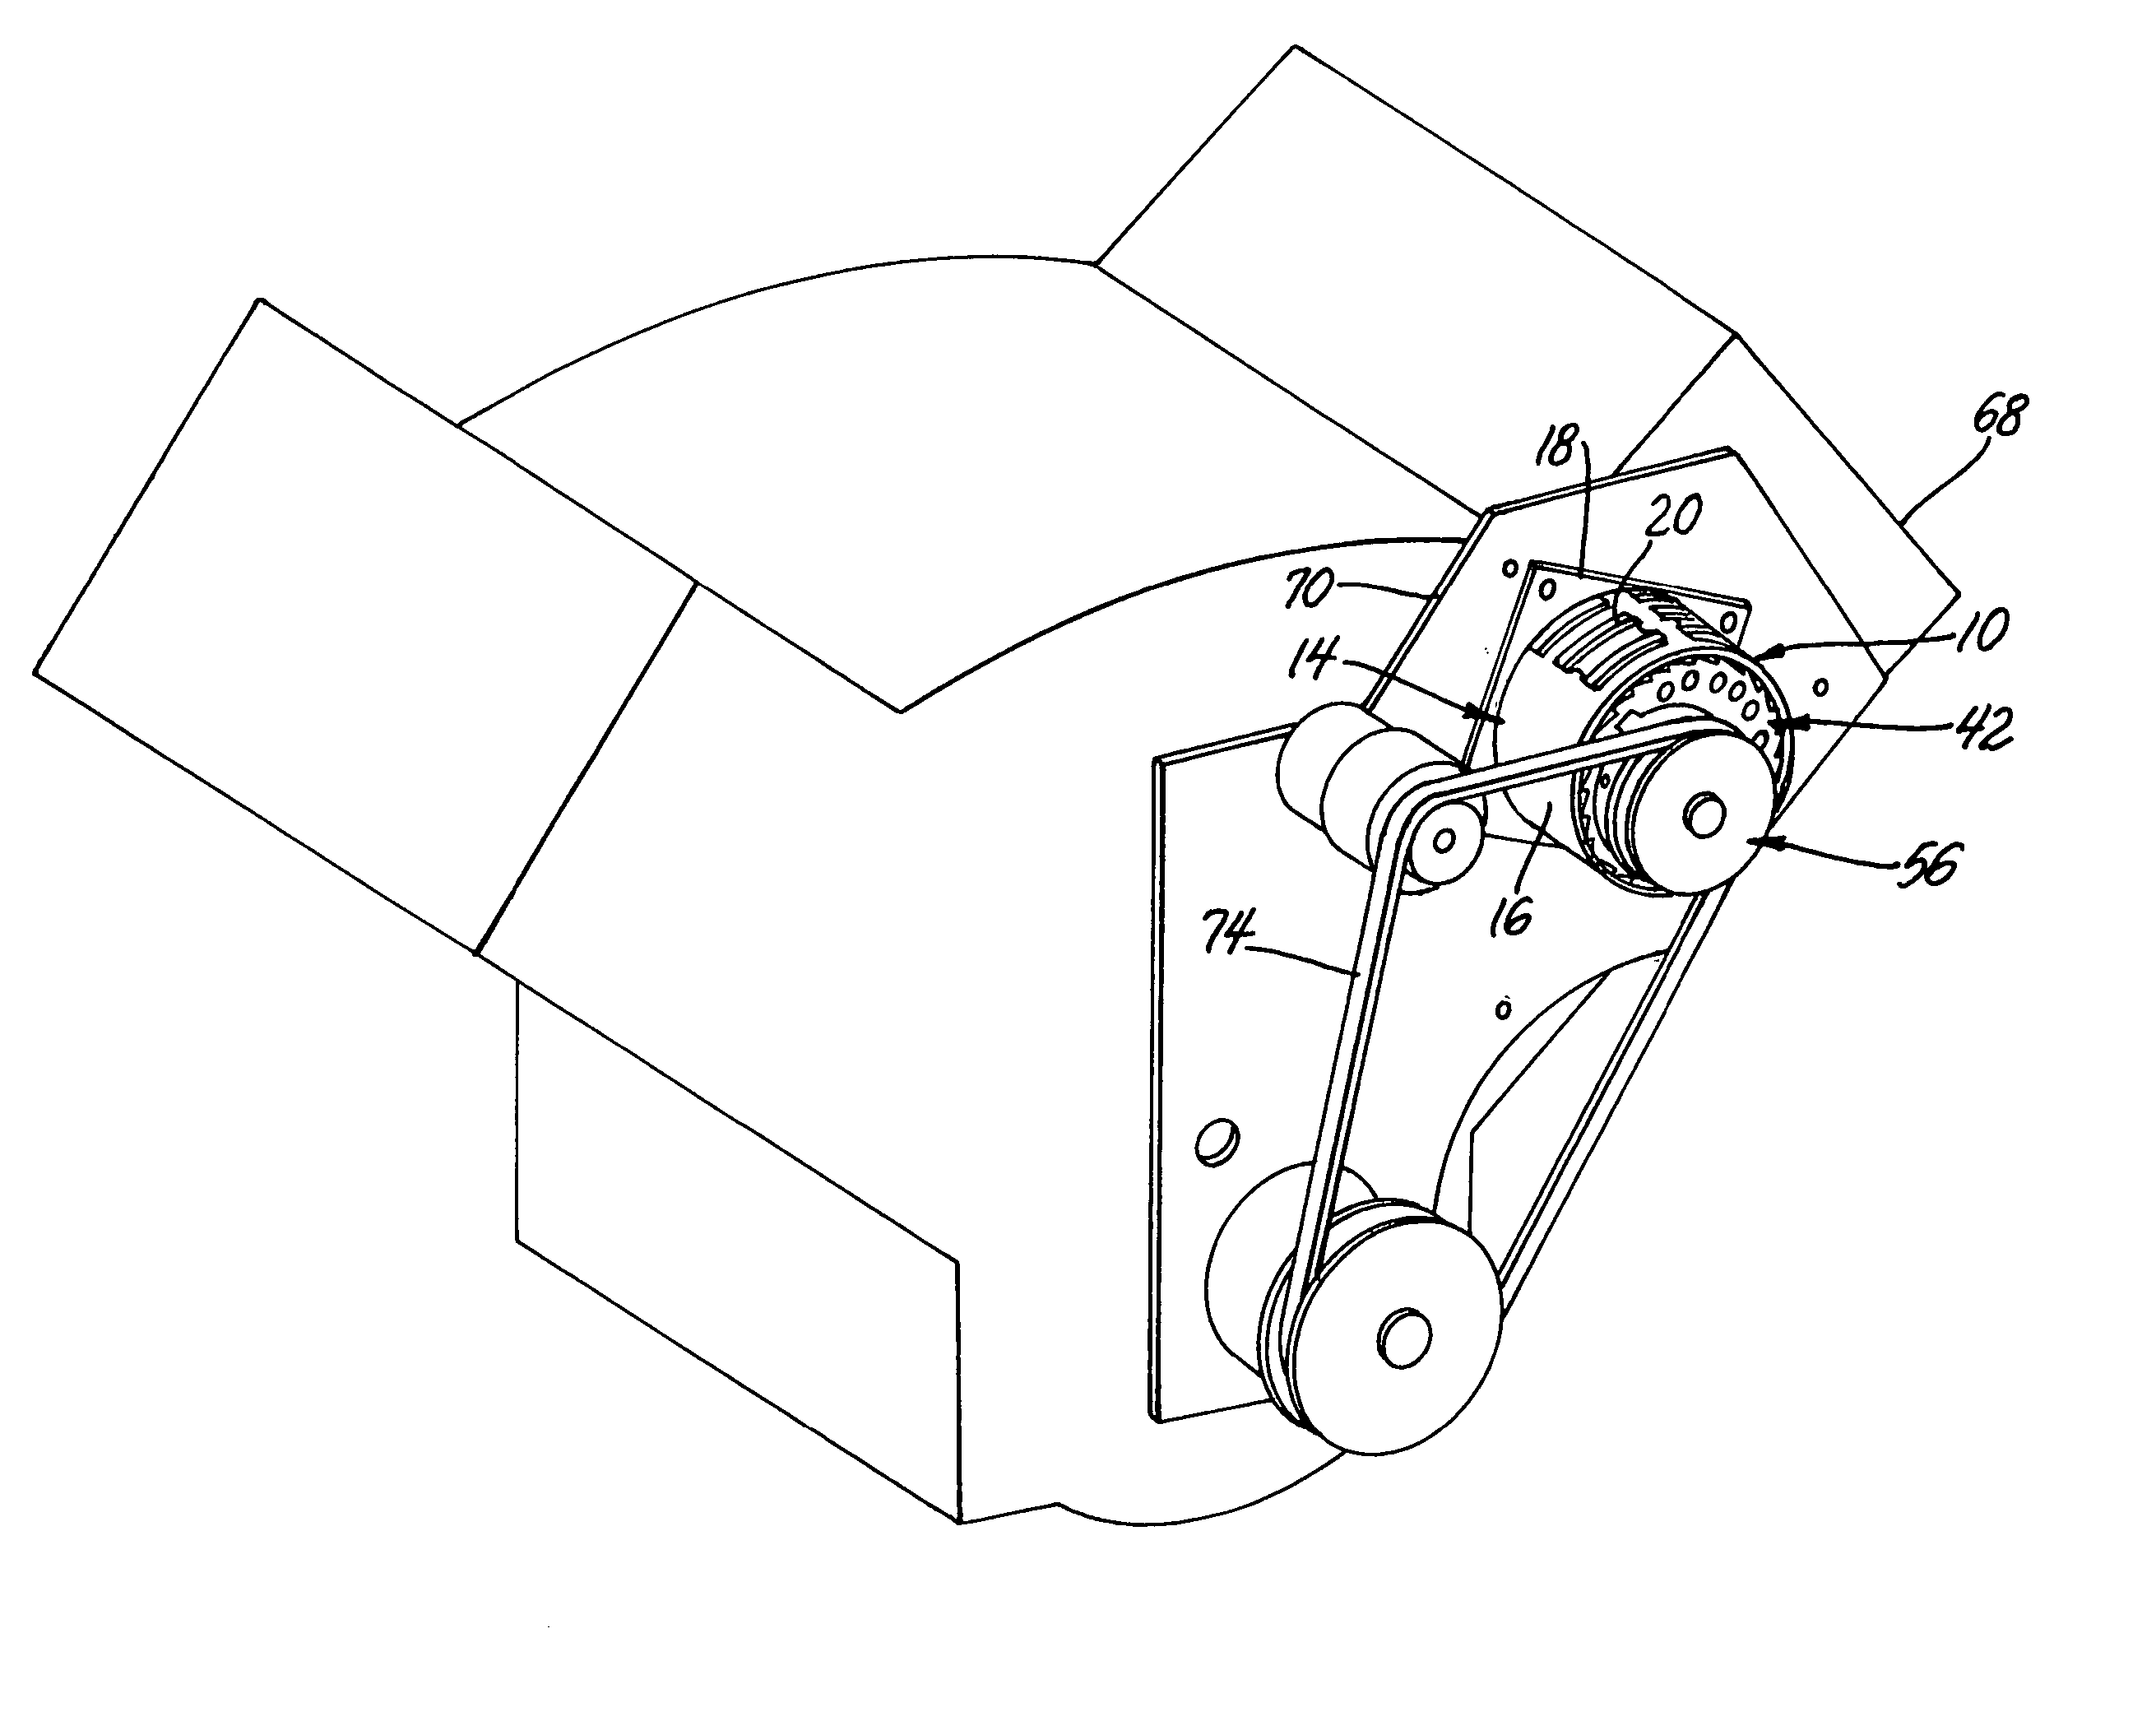 Eccentric mounting and adjustment system for belt driven devices